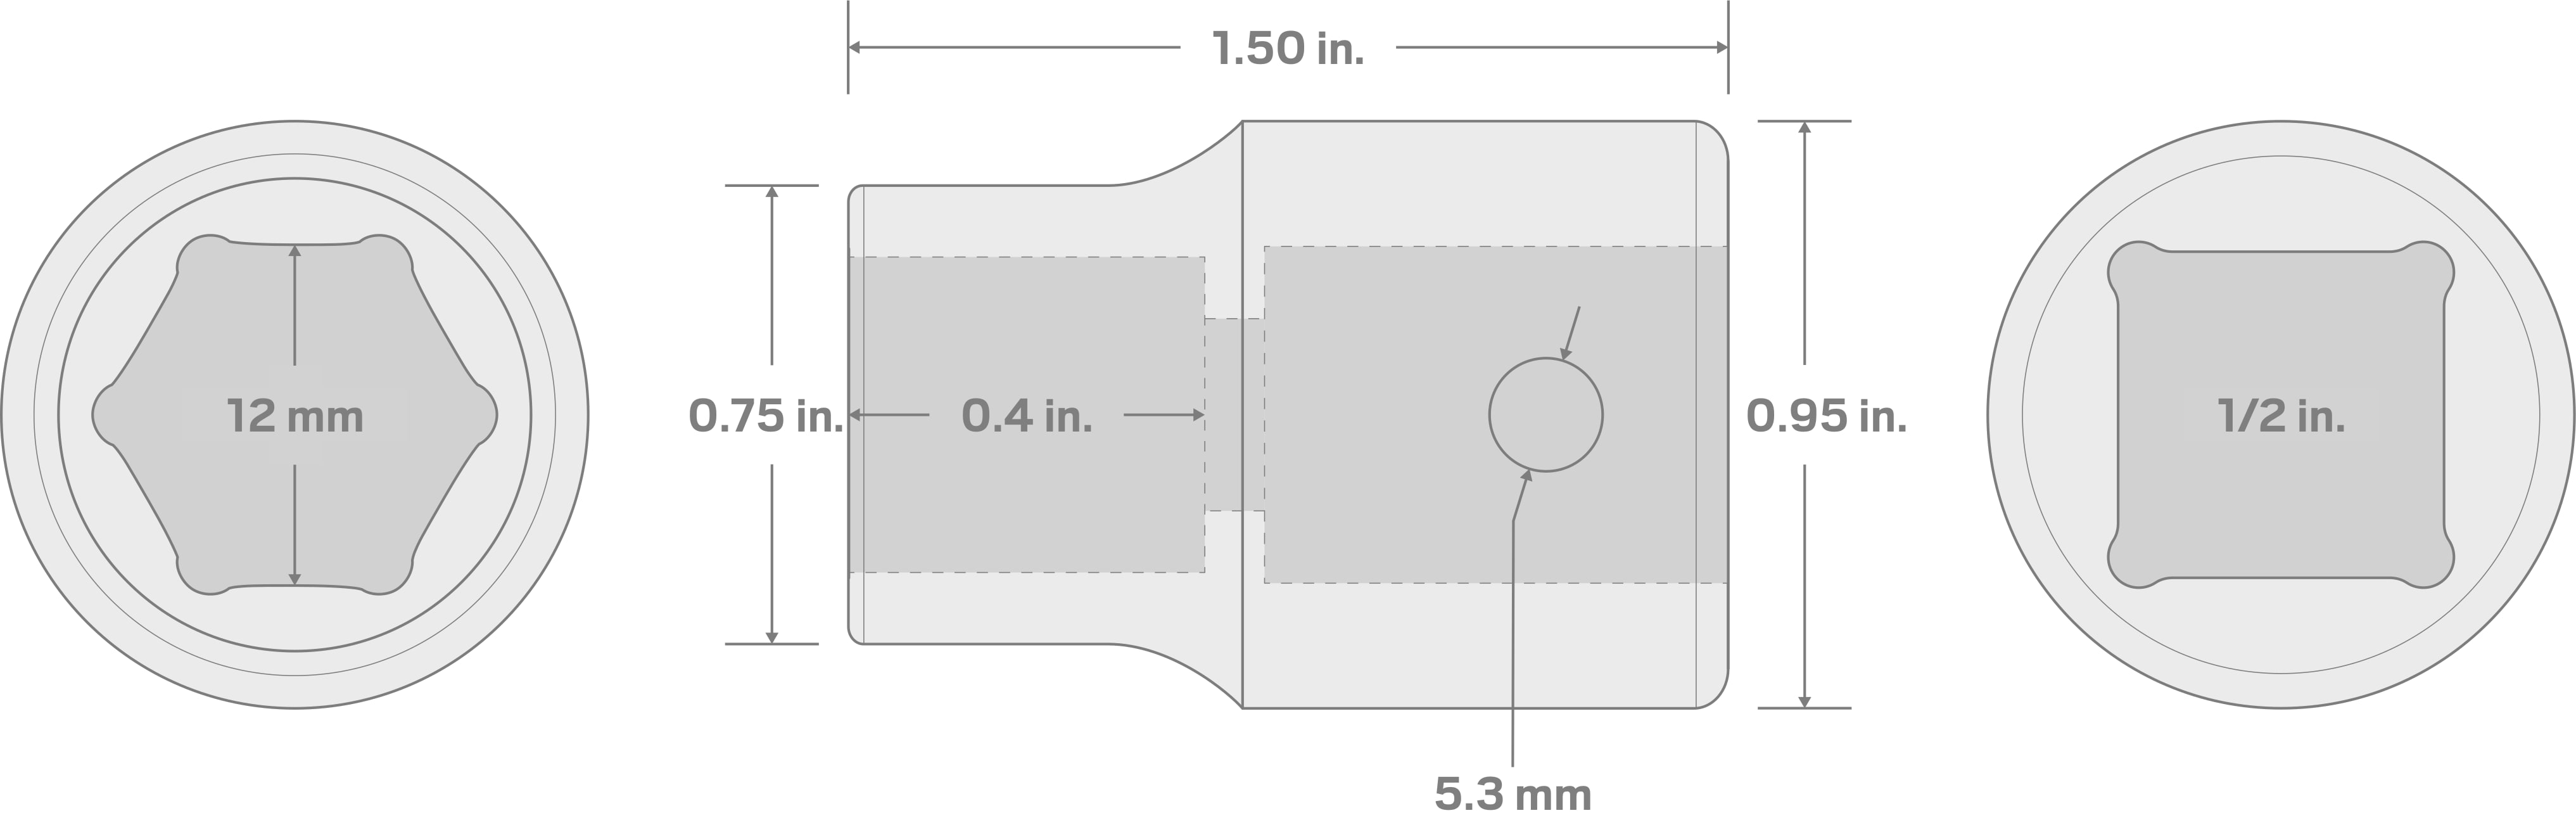 Specs for 1/2 Inch Drive x 12 mm 6-Point Impact Socket